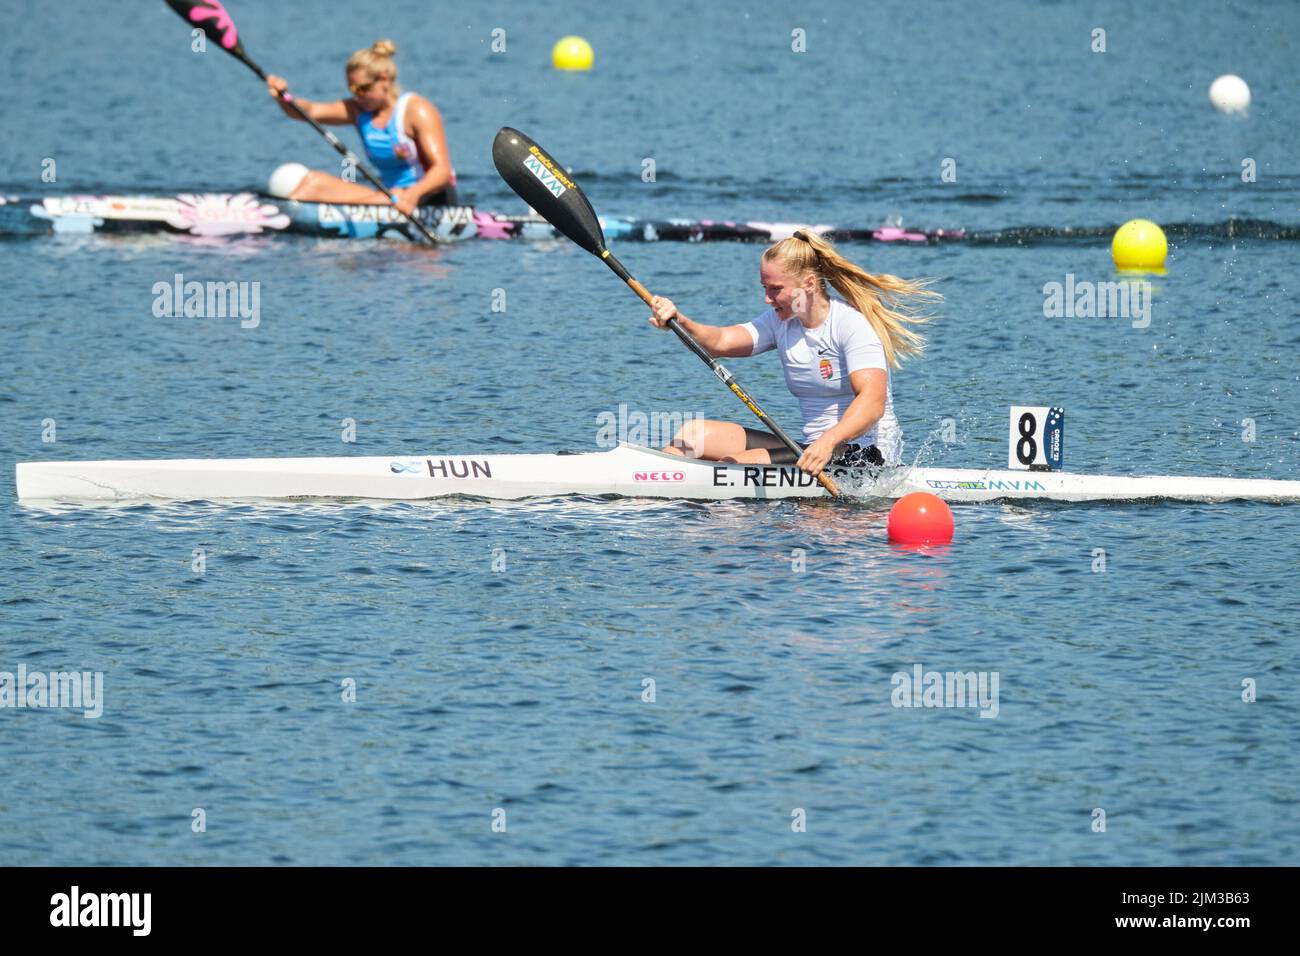 Dartmouth, Canada. August 4th, 2022. Eszter RENDESSY from Hungary close to the finish on her way to winning her qualifying heat in the Women K1 1000m race at the World Championship. She now moves straight to the finals later this week. The 2022 ICF Canoe Sprint and Paracanoe World Championships takes place on Lake Banook in Dartmouth (Halifax). Credit: meanderingemu/Alamy Live News Stock Photo